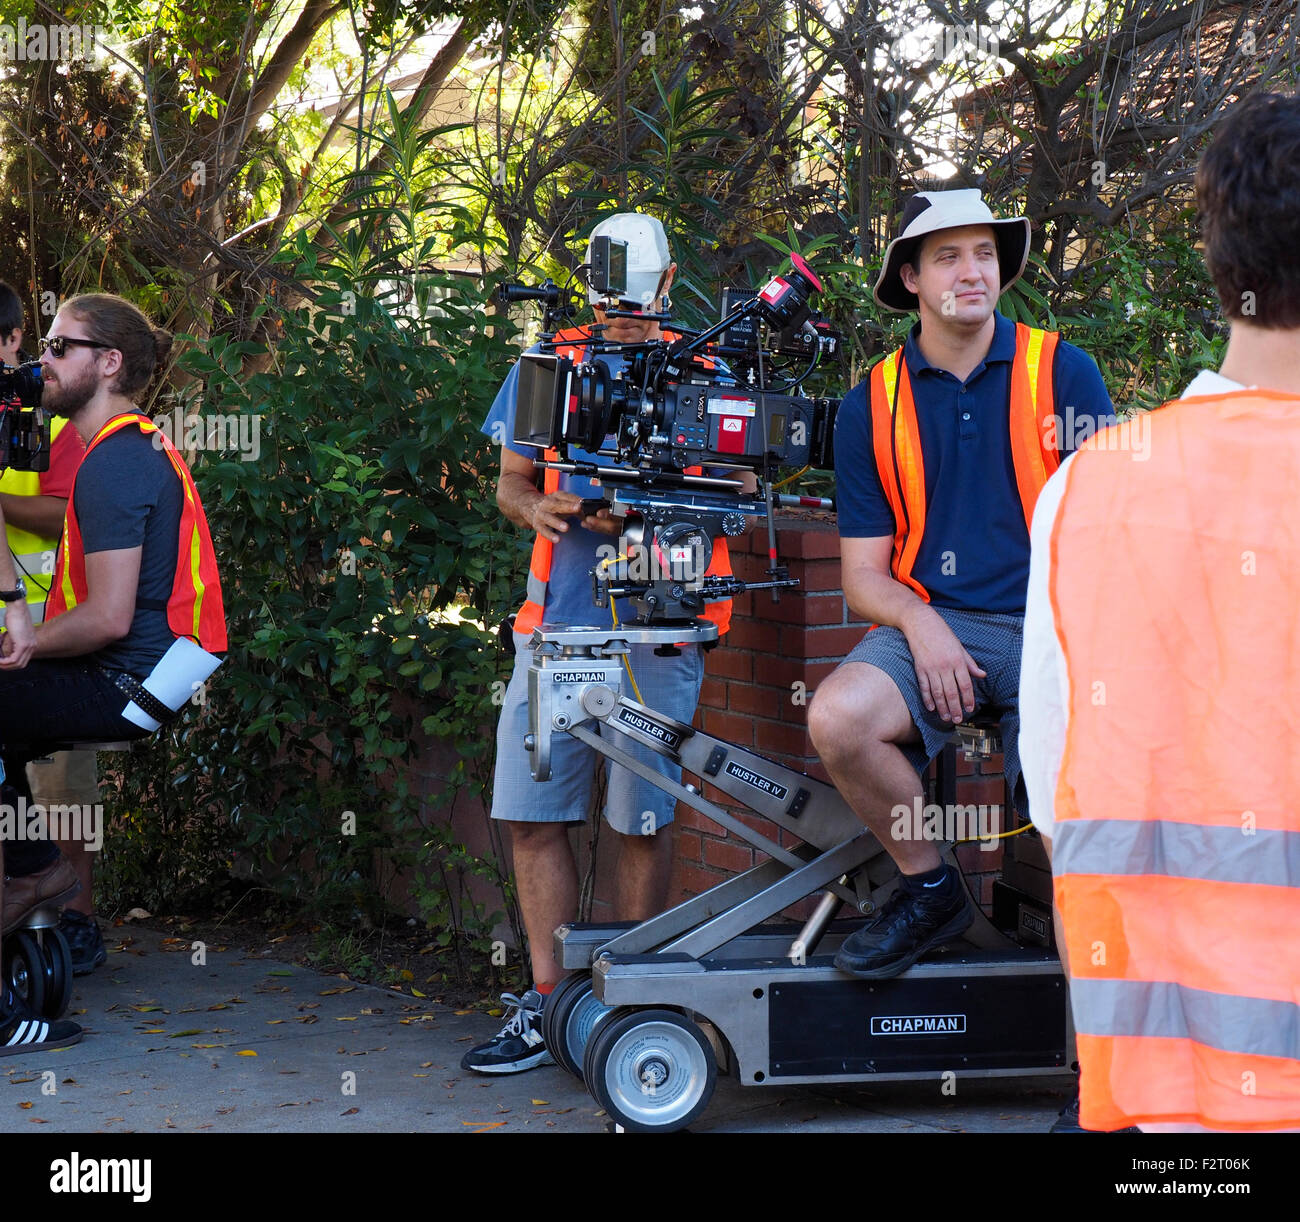 Crew and Movie Making Equipment on Location Stock Photo